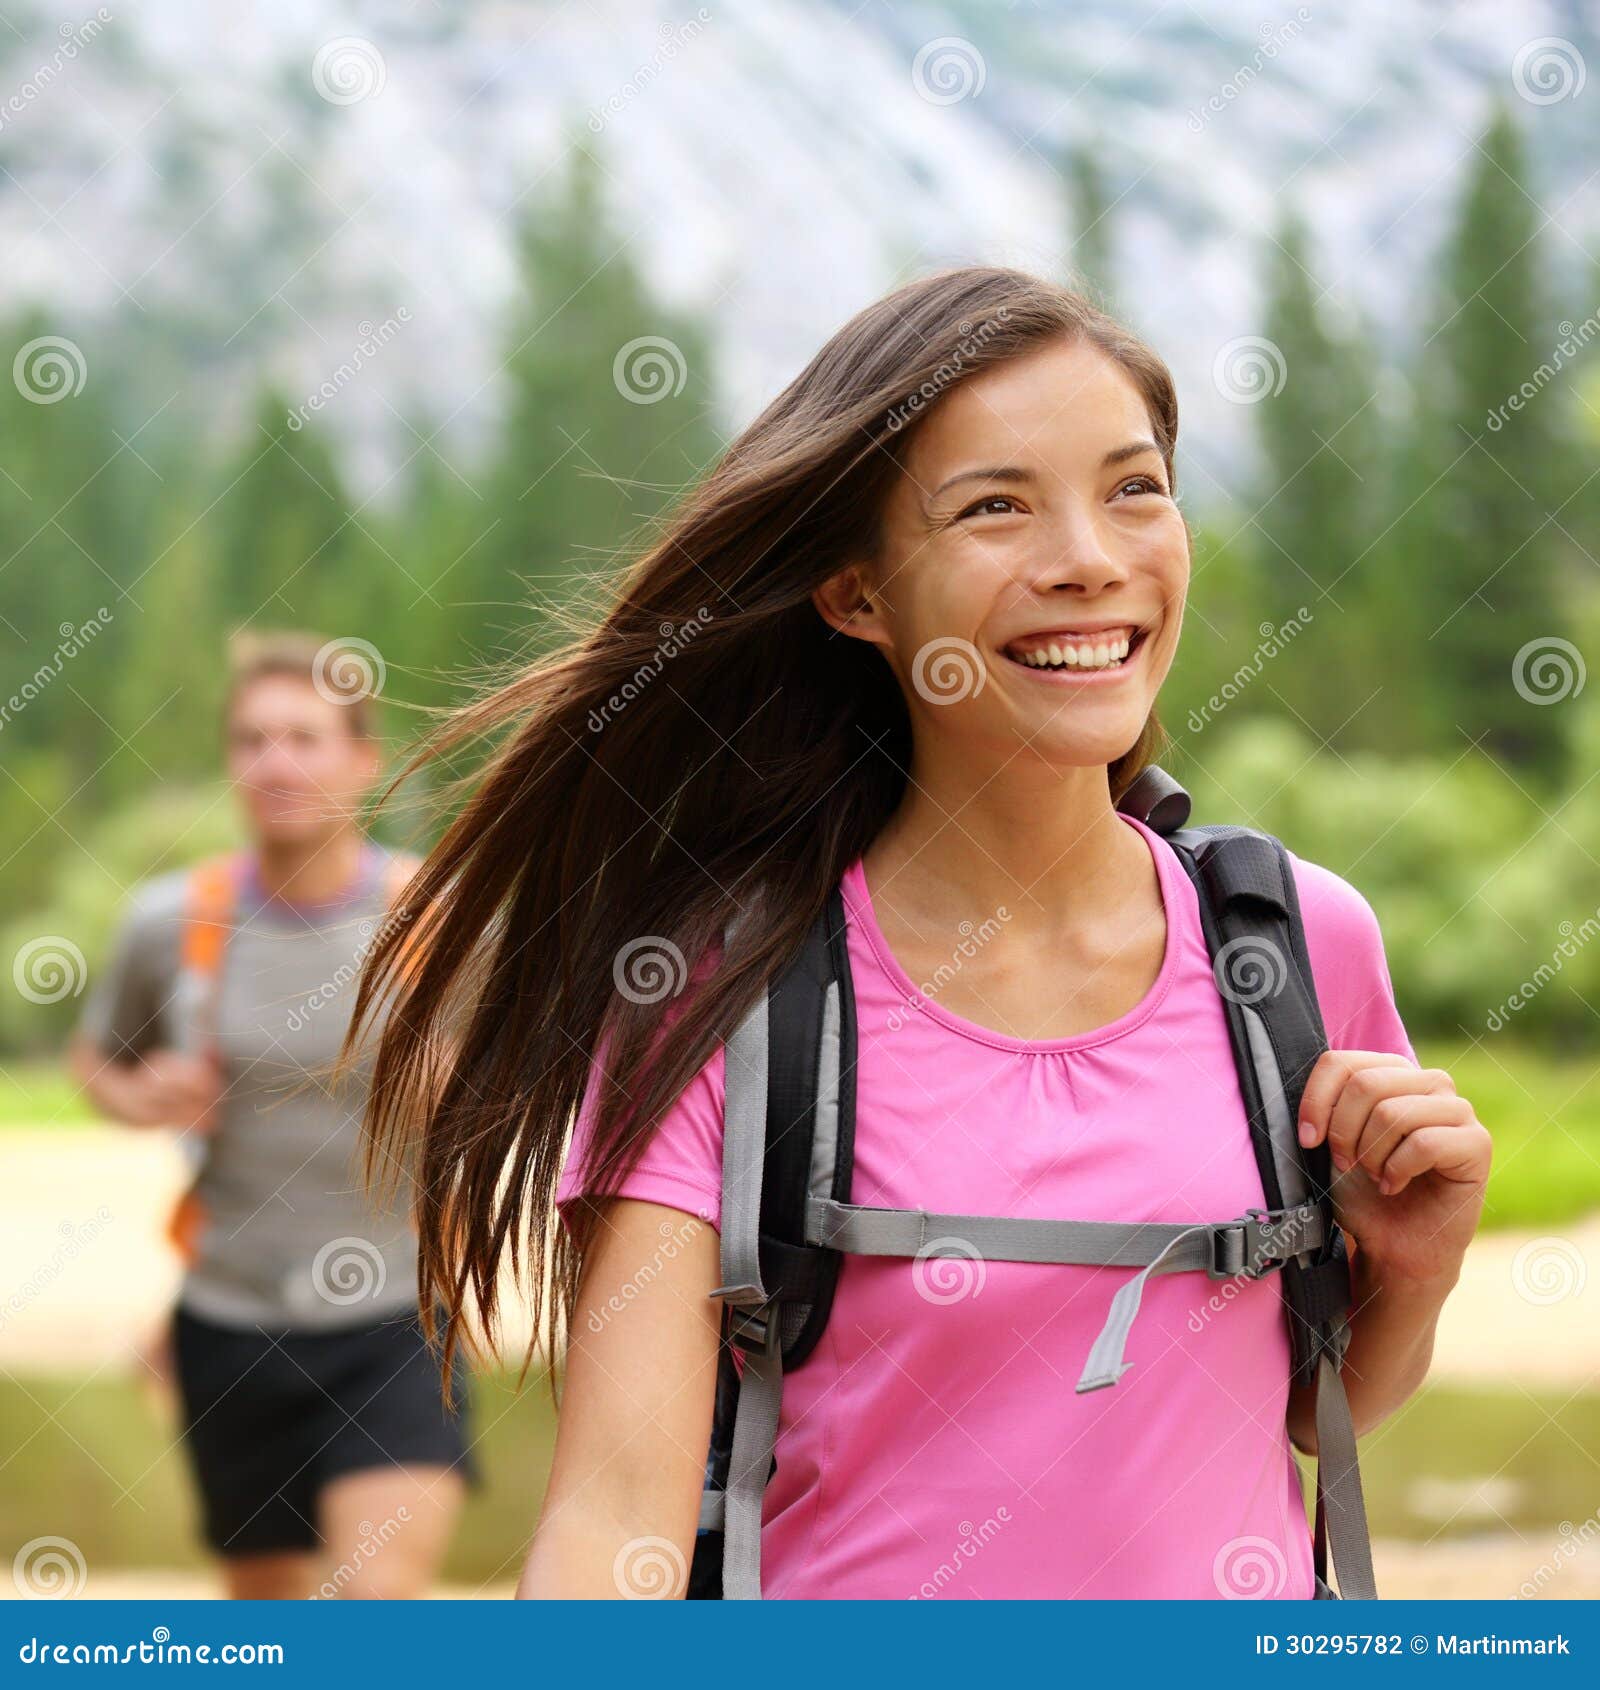 Happy Hiking Woman Giving Thumbs Up Smiling. Young Hiker Woman